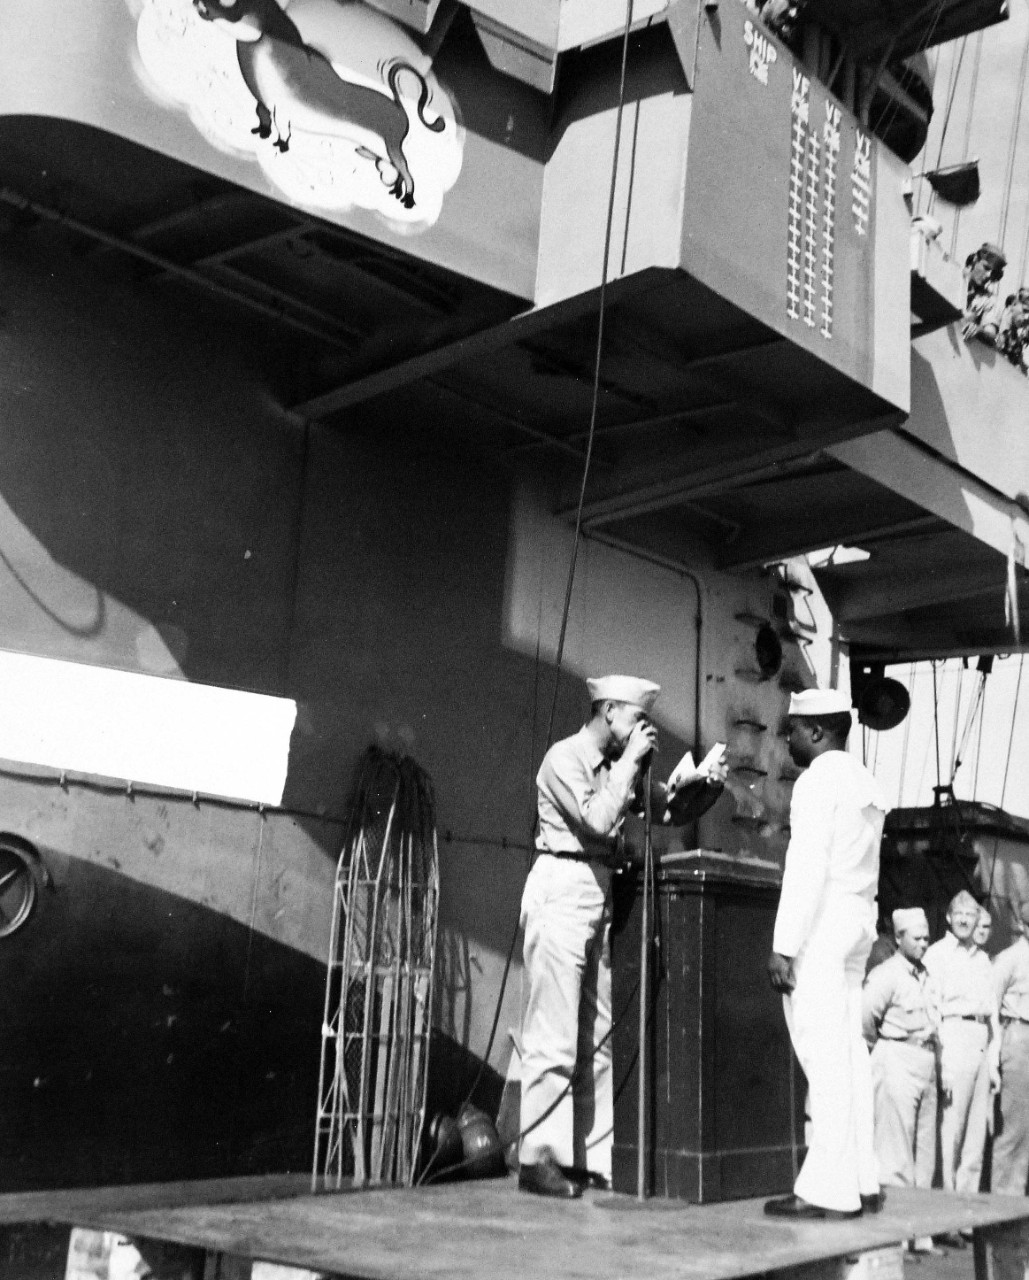 208-NP-King:   Steward's Mate Second Class Ed King, October 1944.  Captain H.W. Taylor of USS Cowpens (CVL-25) presents commendation to Steward’s Mate Second Class Ed King, October 1944. Official U.S. Navy photograph, now in the collections of the National Archives.   